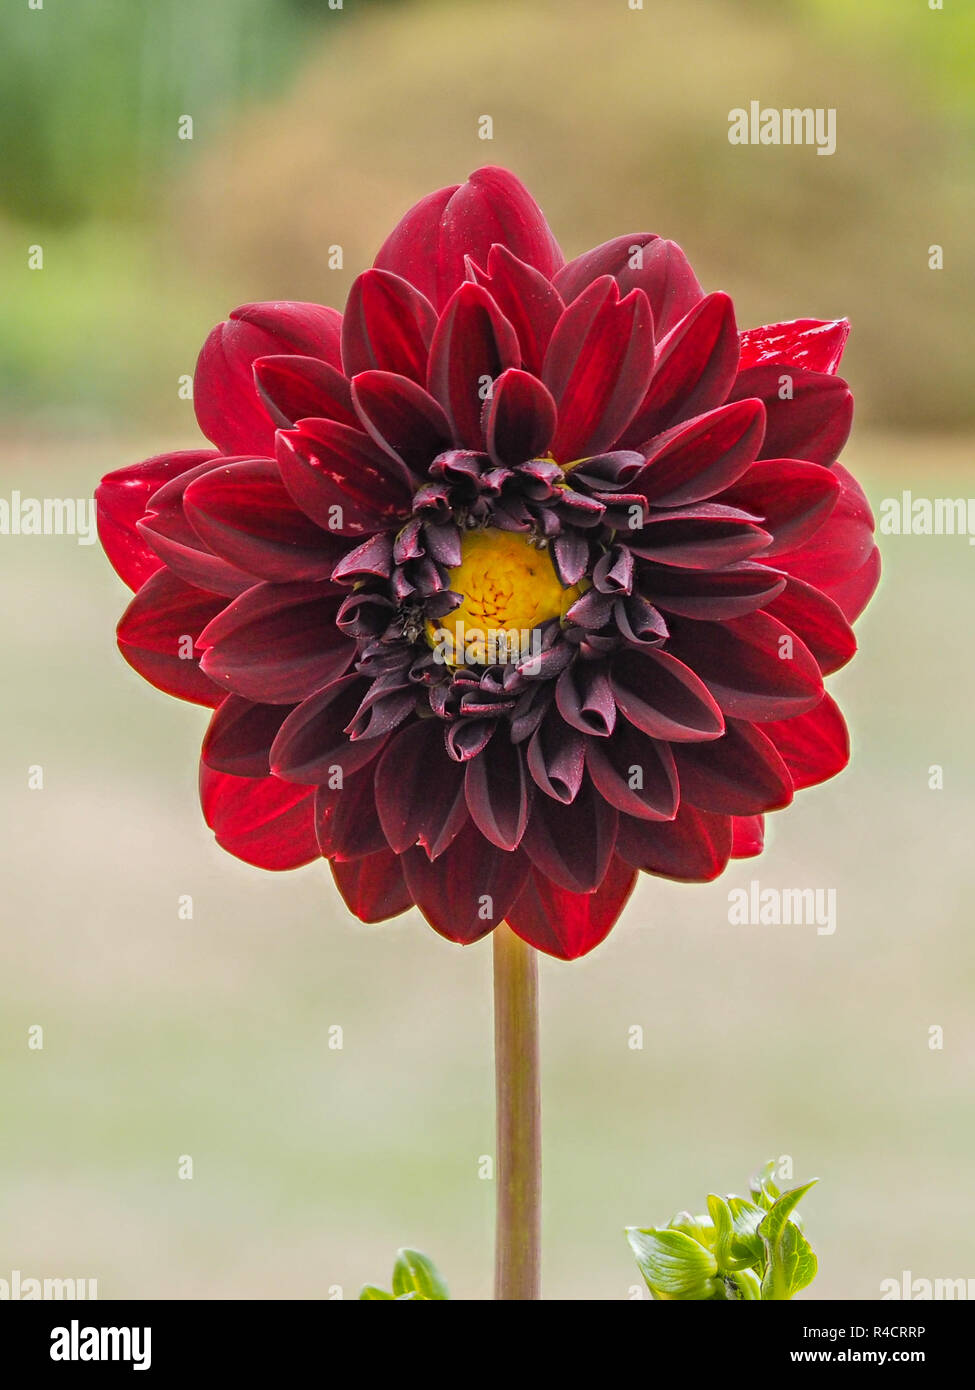 Dahlia 'Bishop of Auckland', single red flower showing yellow stamen and  dark purple leaves Stock Photo - Alamy